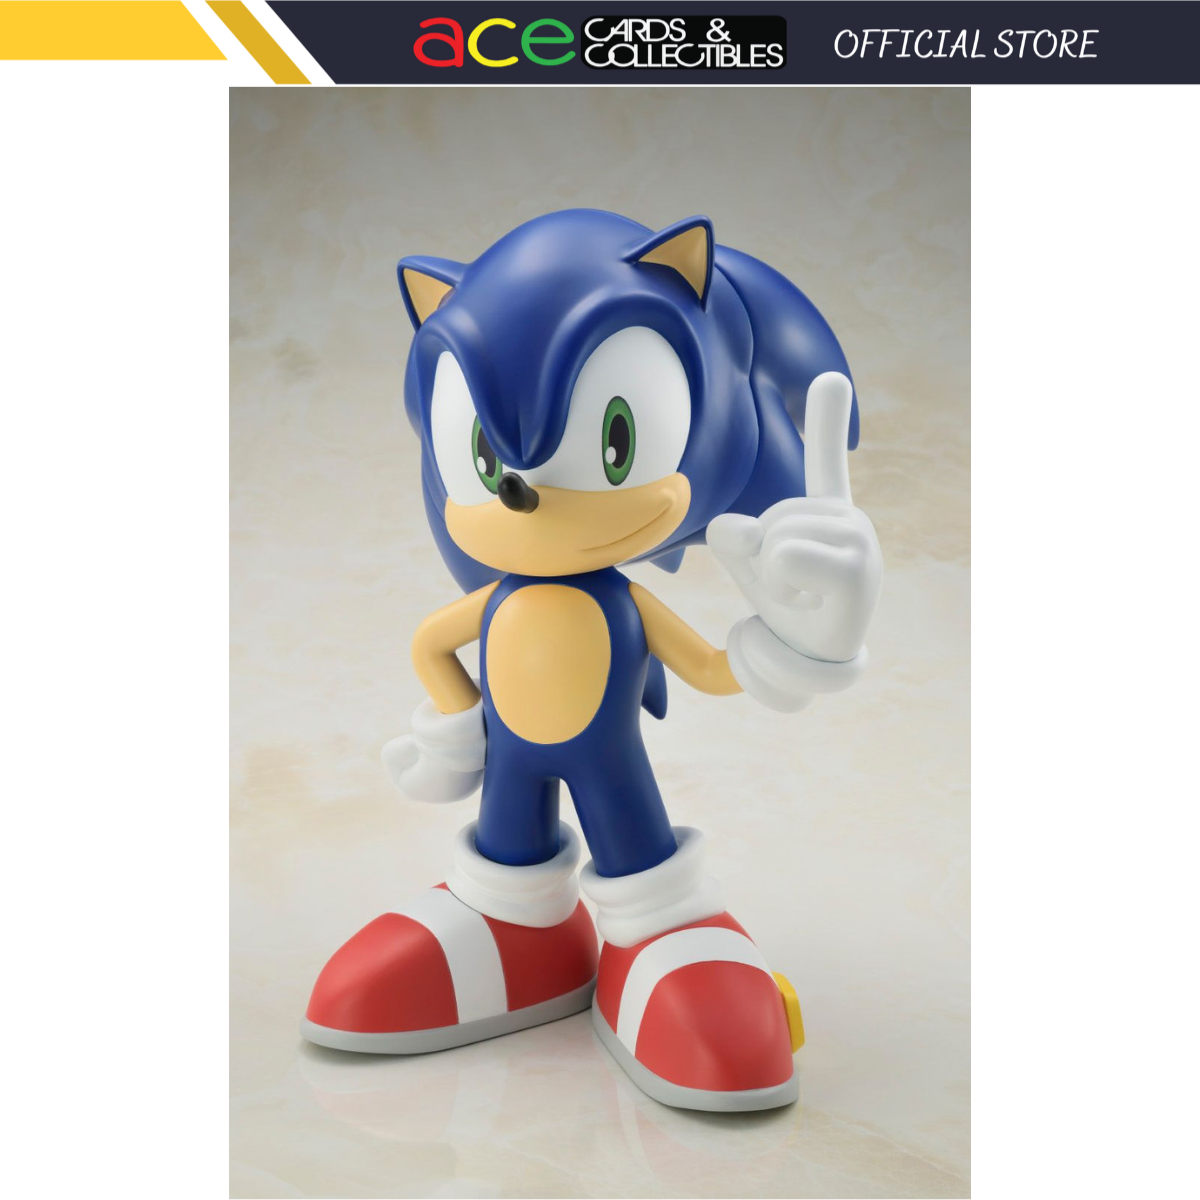 SoftB Sonic The Hedgehog Figure-BellFine-Ace Cards & Collectibles